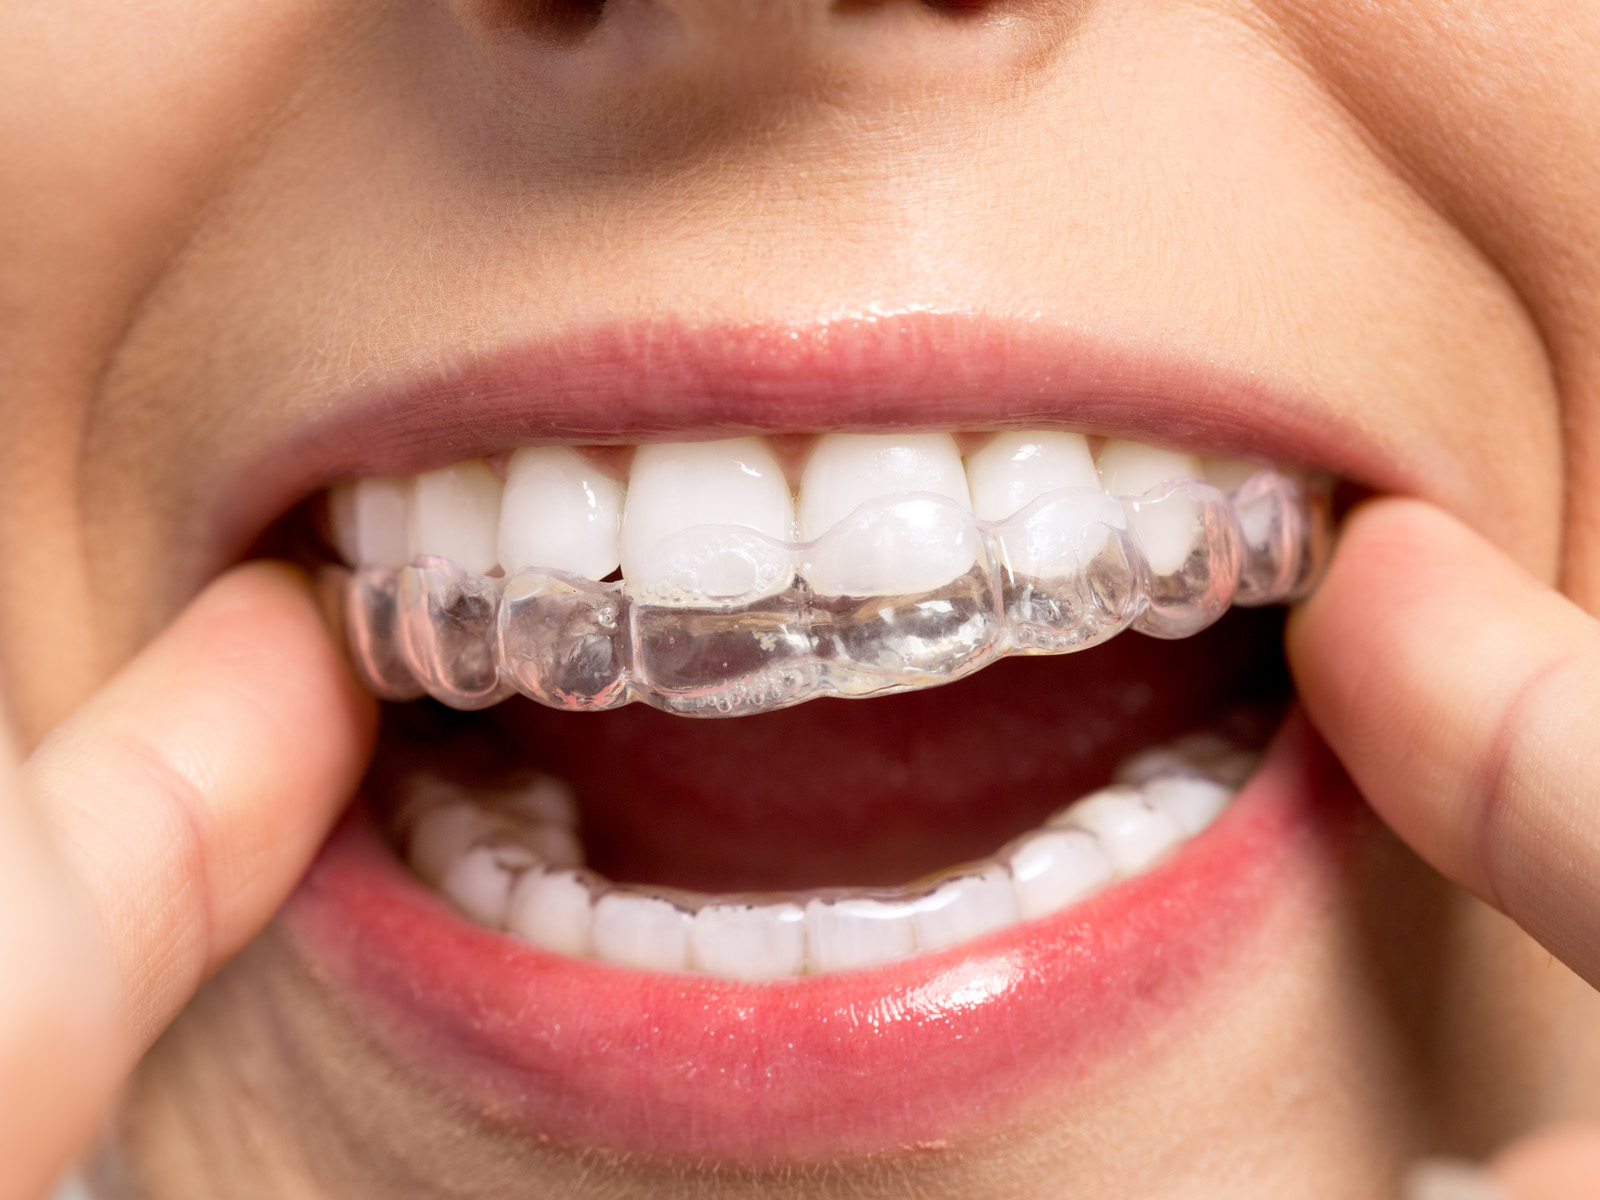 Can Invisalign fix really crooked teeth?